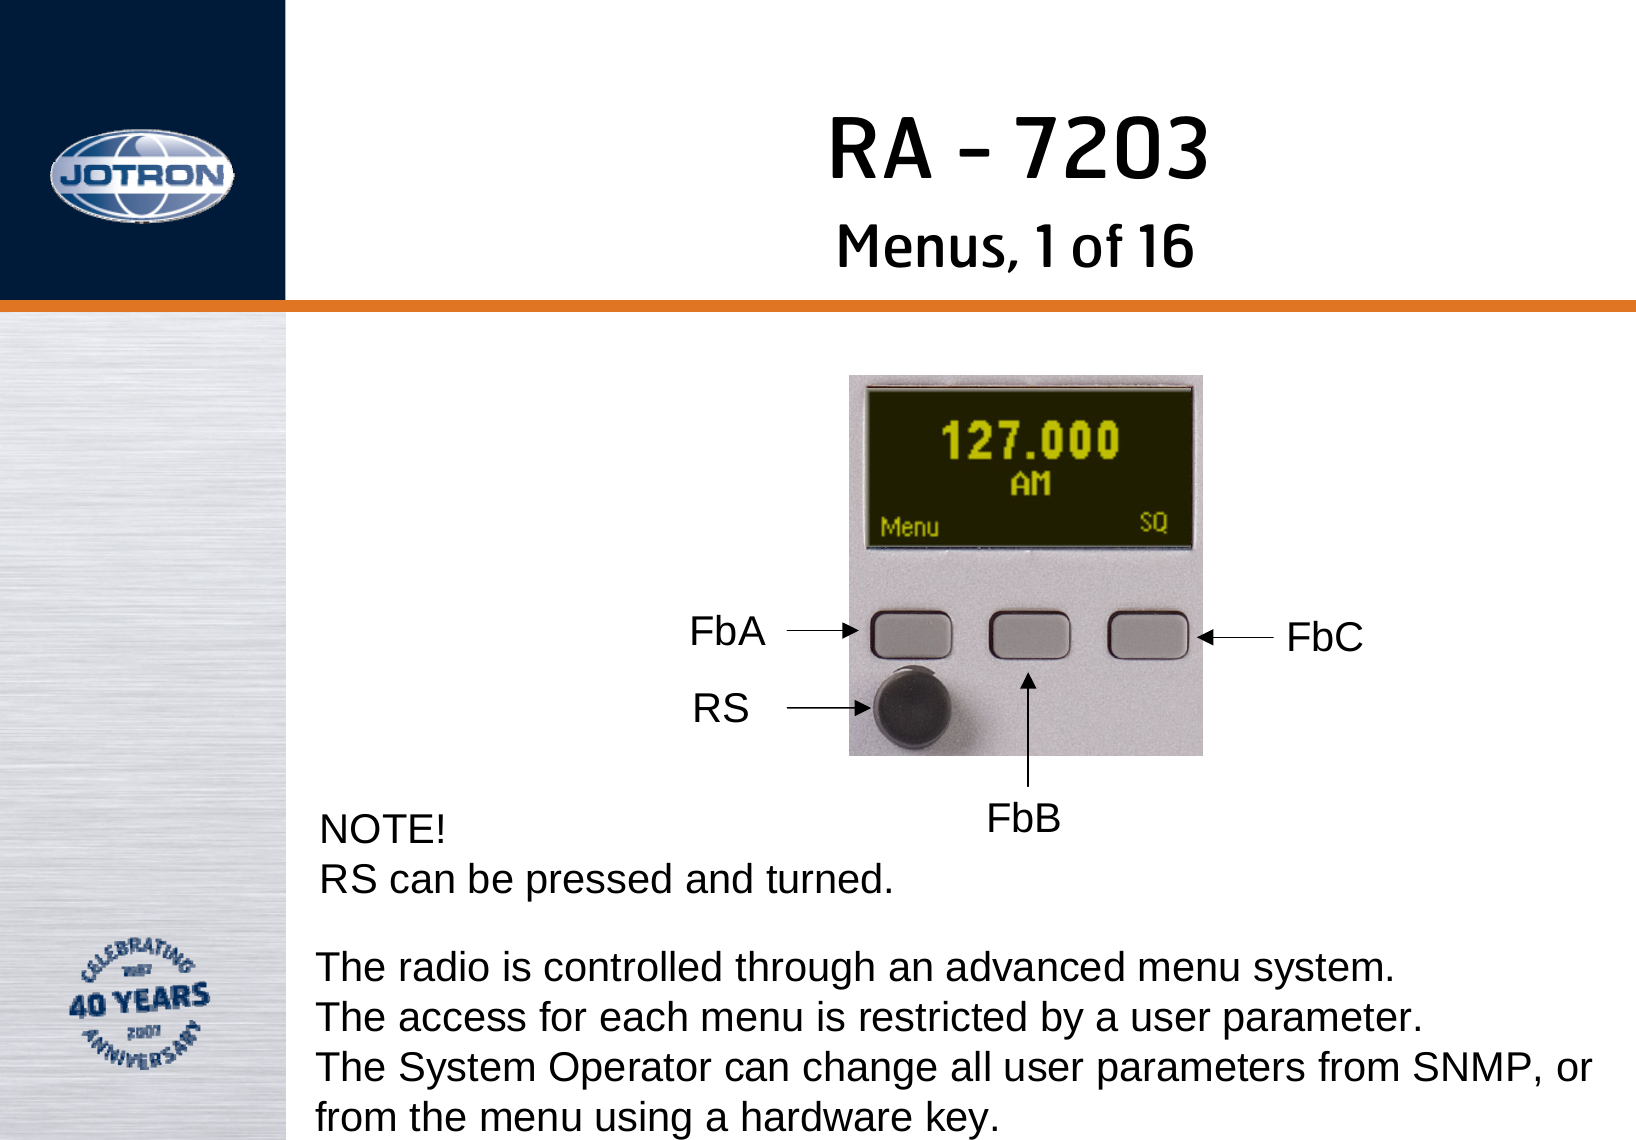 RA - 7203Menus, 1 of 16FbARSFbBFbCNOTE!                                      RS can be pressed and turned.The radio is controlled through an advanced menu system.The access for each menu is restricted by a user parameter. The System Operator can change all user parameters from SNMP, orfrom the menu using a hardware key.